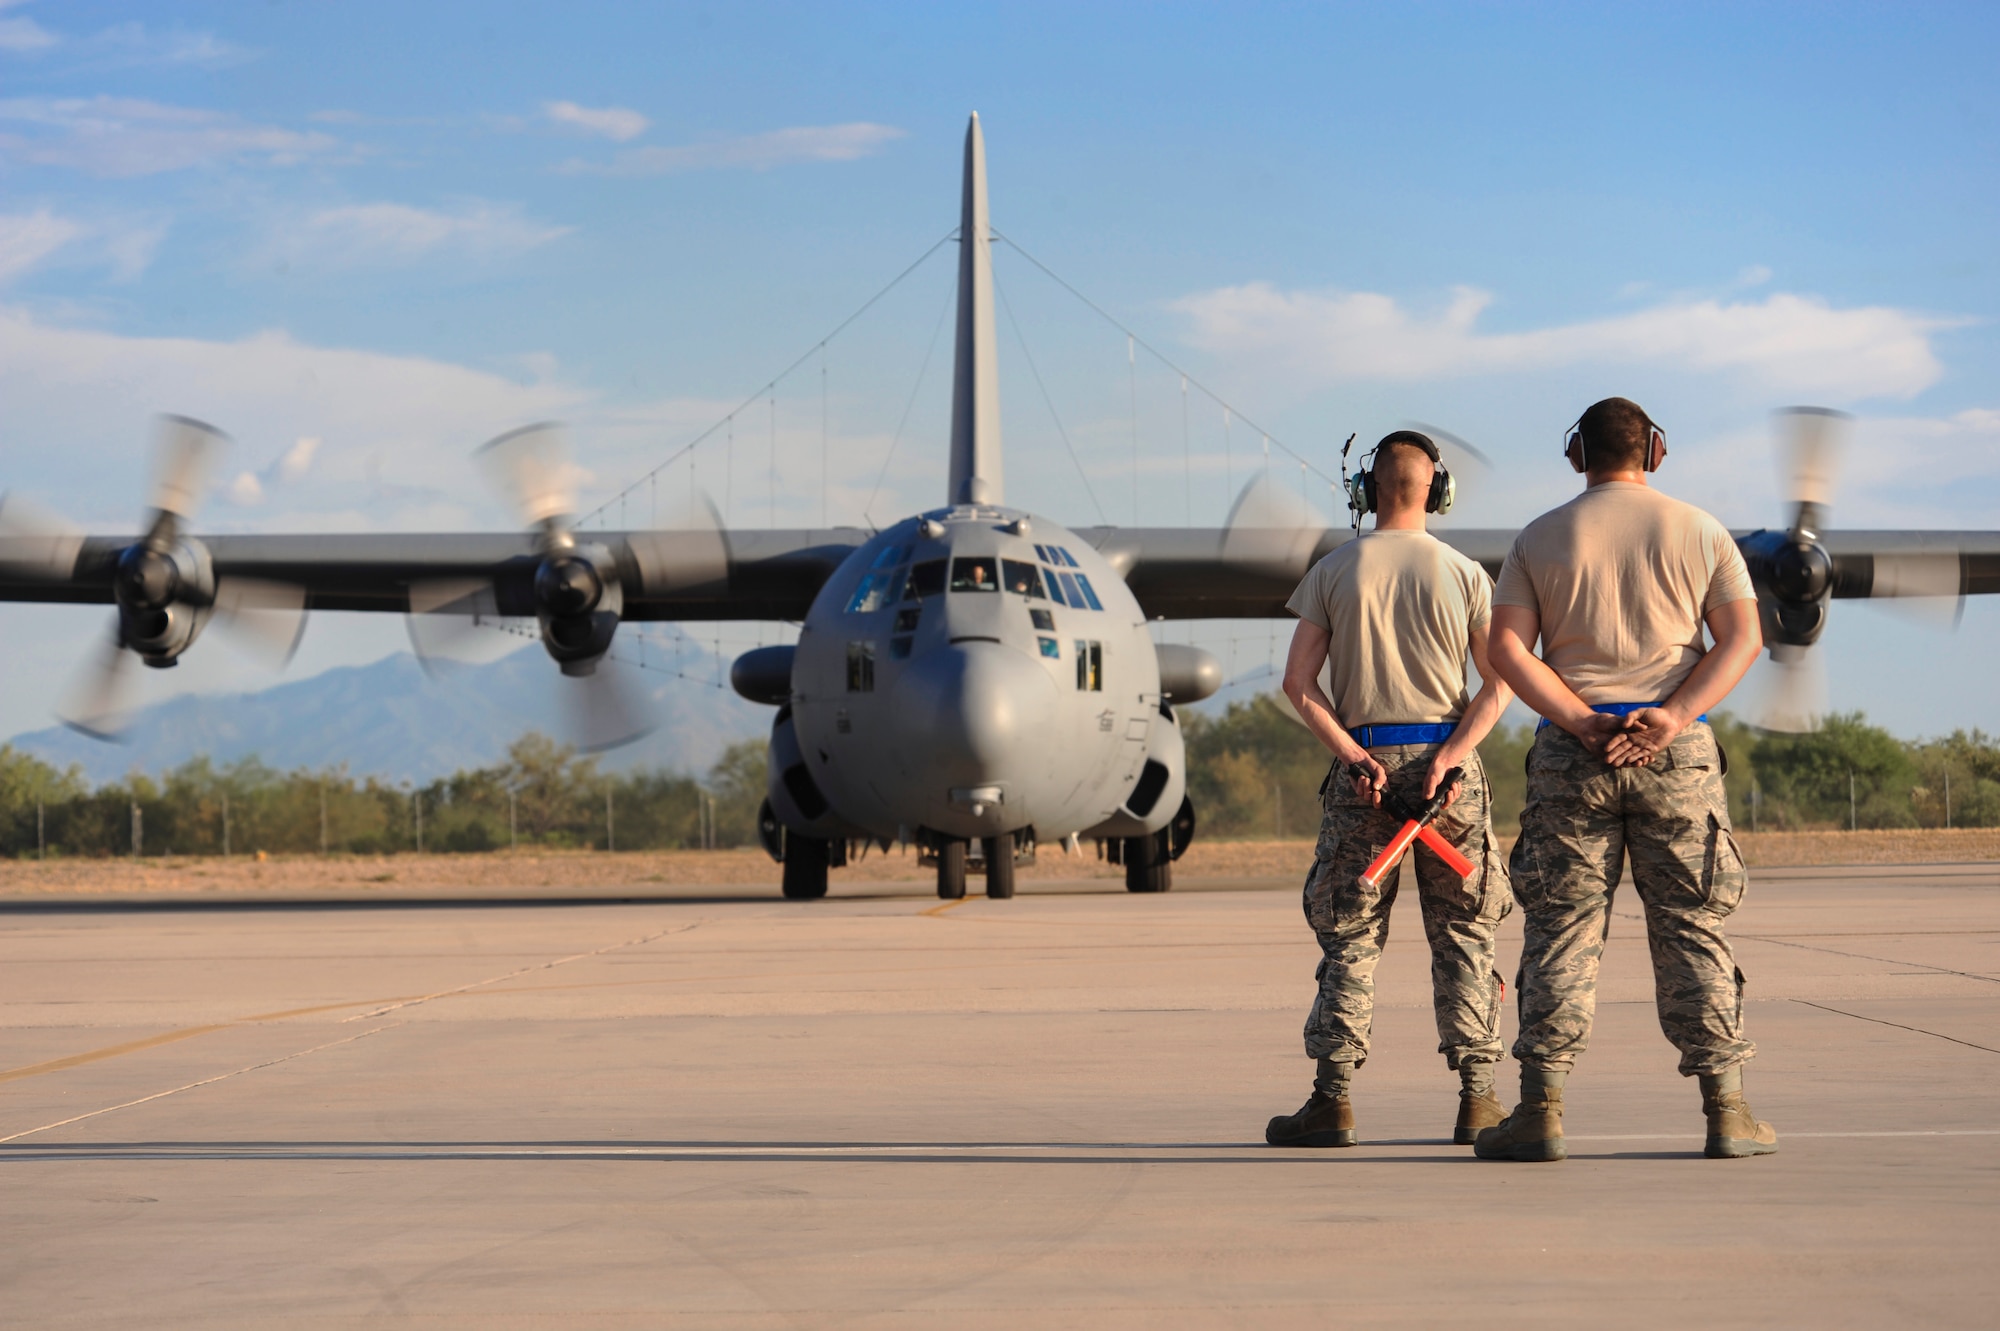 U.S. Air Force Airman 1st Class Joseph Crick, 755th Aircraft Maintenance Squadron special operations forces and personell recovery communication navigation mision system specialist, prepares to marshal an EC-130H Compass Call on the flightline while Senior Airman Nicholas Novotny, 755th AMXS crew chief supervises at Daivs-Monthan Air Force Base, Ariz., July 15, 2015. The 755th AMXS provides war-fighting commanders with combat-ready EC-130H Compass Call aircraft to expeditiously execute information warfare and electronic attack operations. The 755th AMXS plans and executes all on-equipment maintenance actions for 14 EC-130H Compass Call and 1 TC-130H Hercules aircraft. These actions include launch, recovery, scheduled inspections, servicing and component replacement. (U.S. Air Force photo by Airman 1st Class Cheyenne Morigeau/Released)